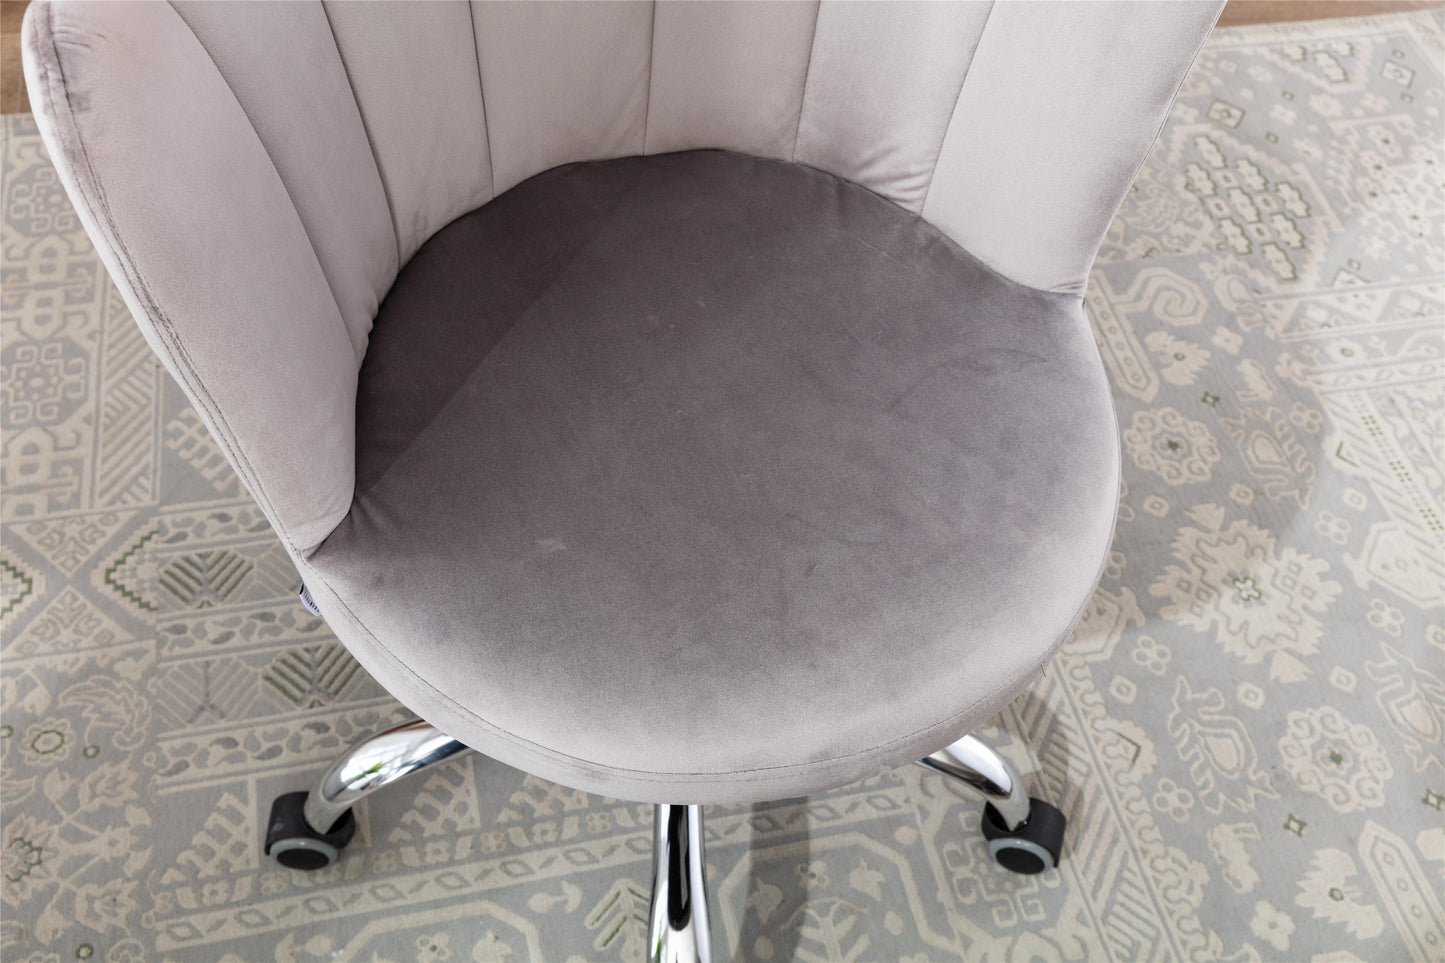 COOLMORE   Swivel Shell Chair for Living Room/Bed Room, Modern Leisure office Chair  Gray